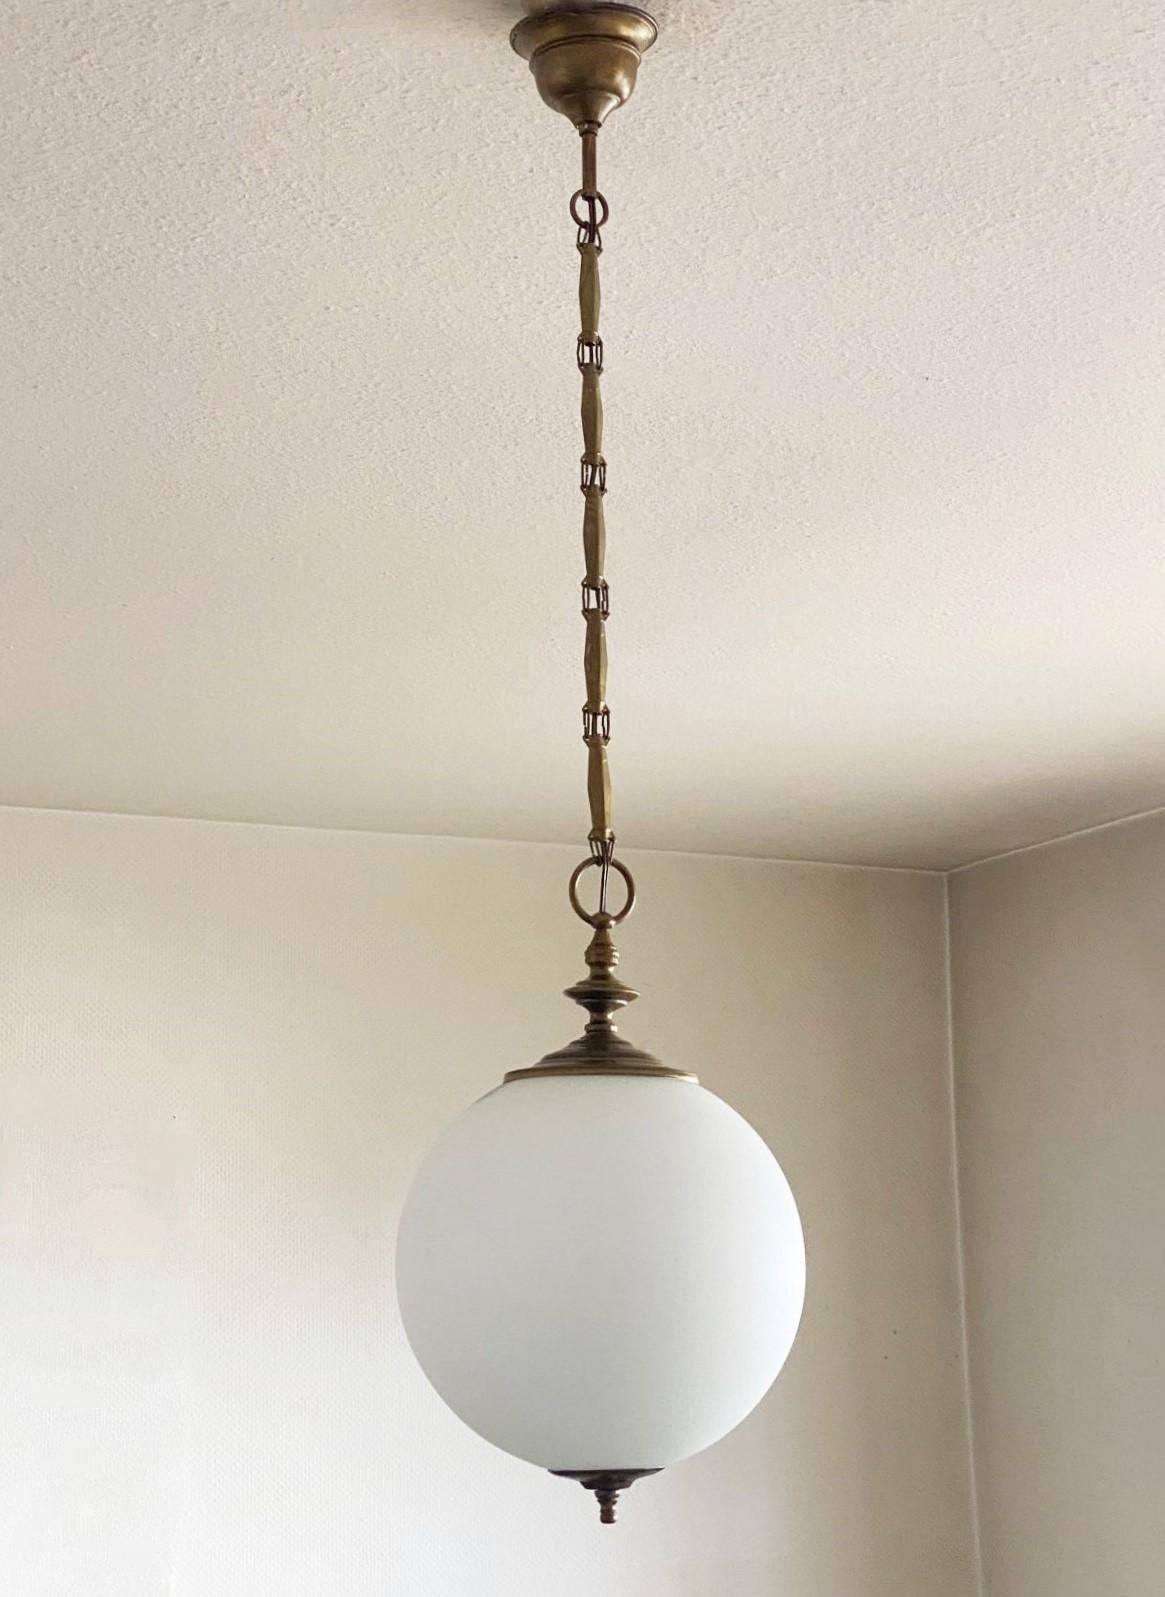 Mid-Century Modern satin glass globe pendant with beautiful bronzed brass mounts, chain and canopy, Italy 1930-1939. This piece is in fine vintage conge condition, no damages, rewired. Ir takes an Edison E27 crew bulb. LED bulbs can also be